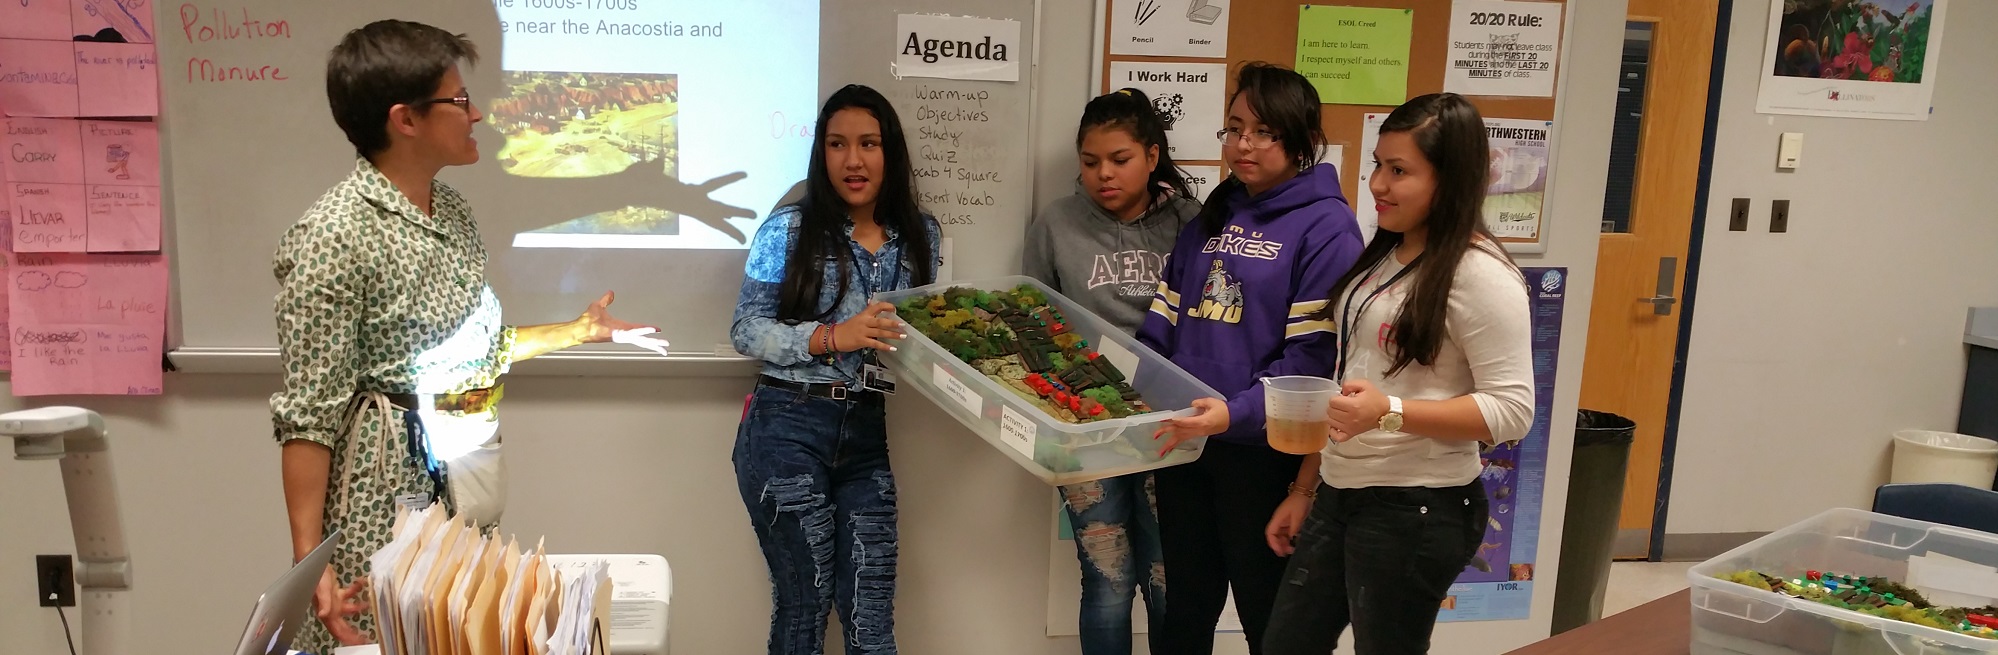 Several high school students standing in front of a classroom presenting their watershed model.